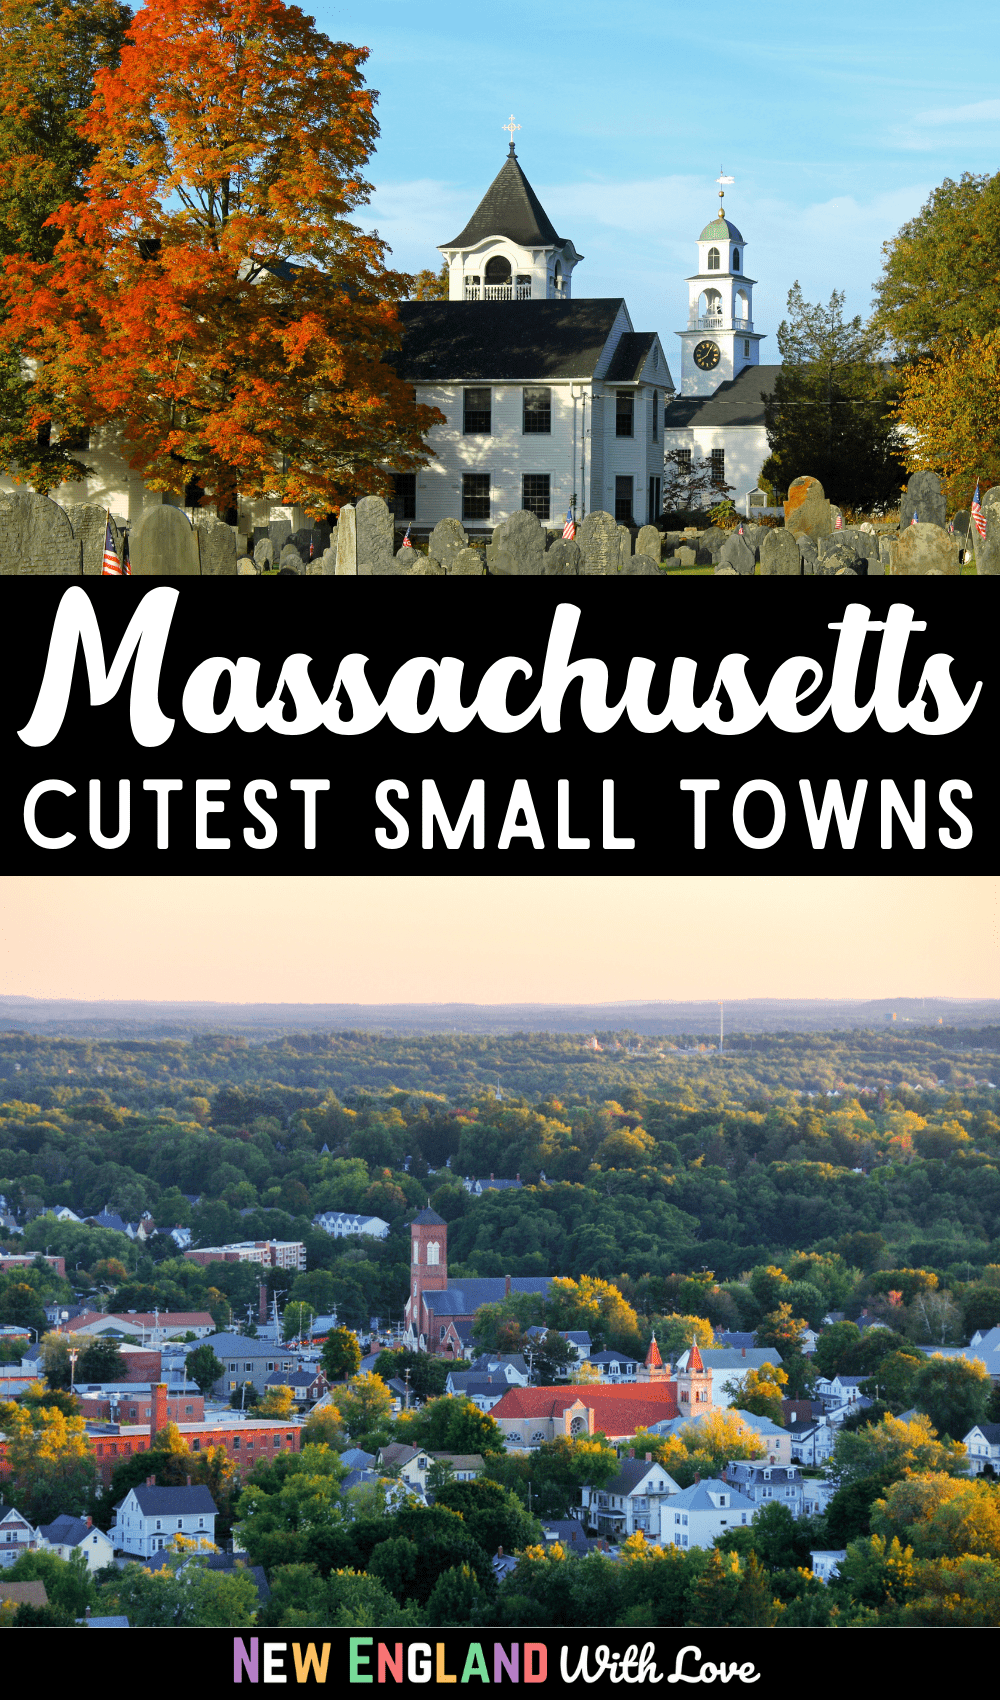 Pinterest graphic stating "Massachusetts Cutest Small Towns" with 2 pictures of a town and cemetery in the fall